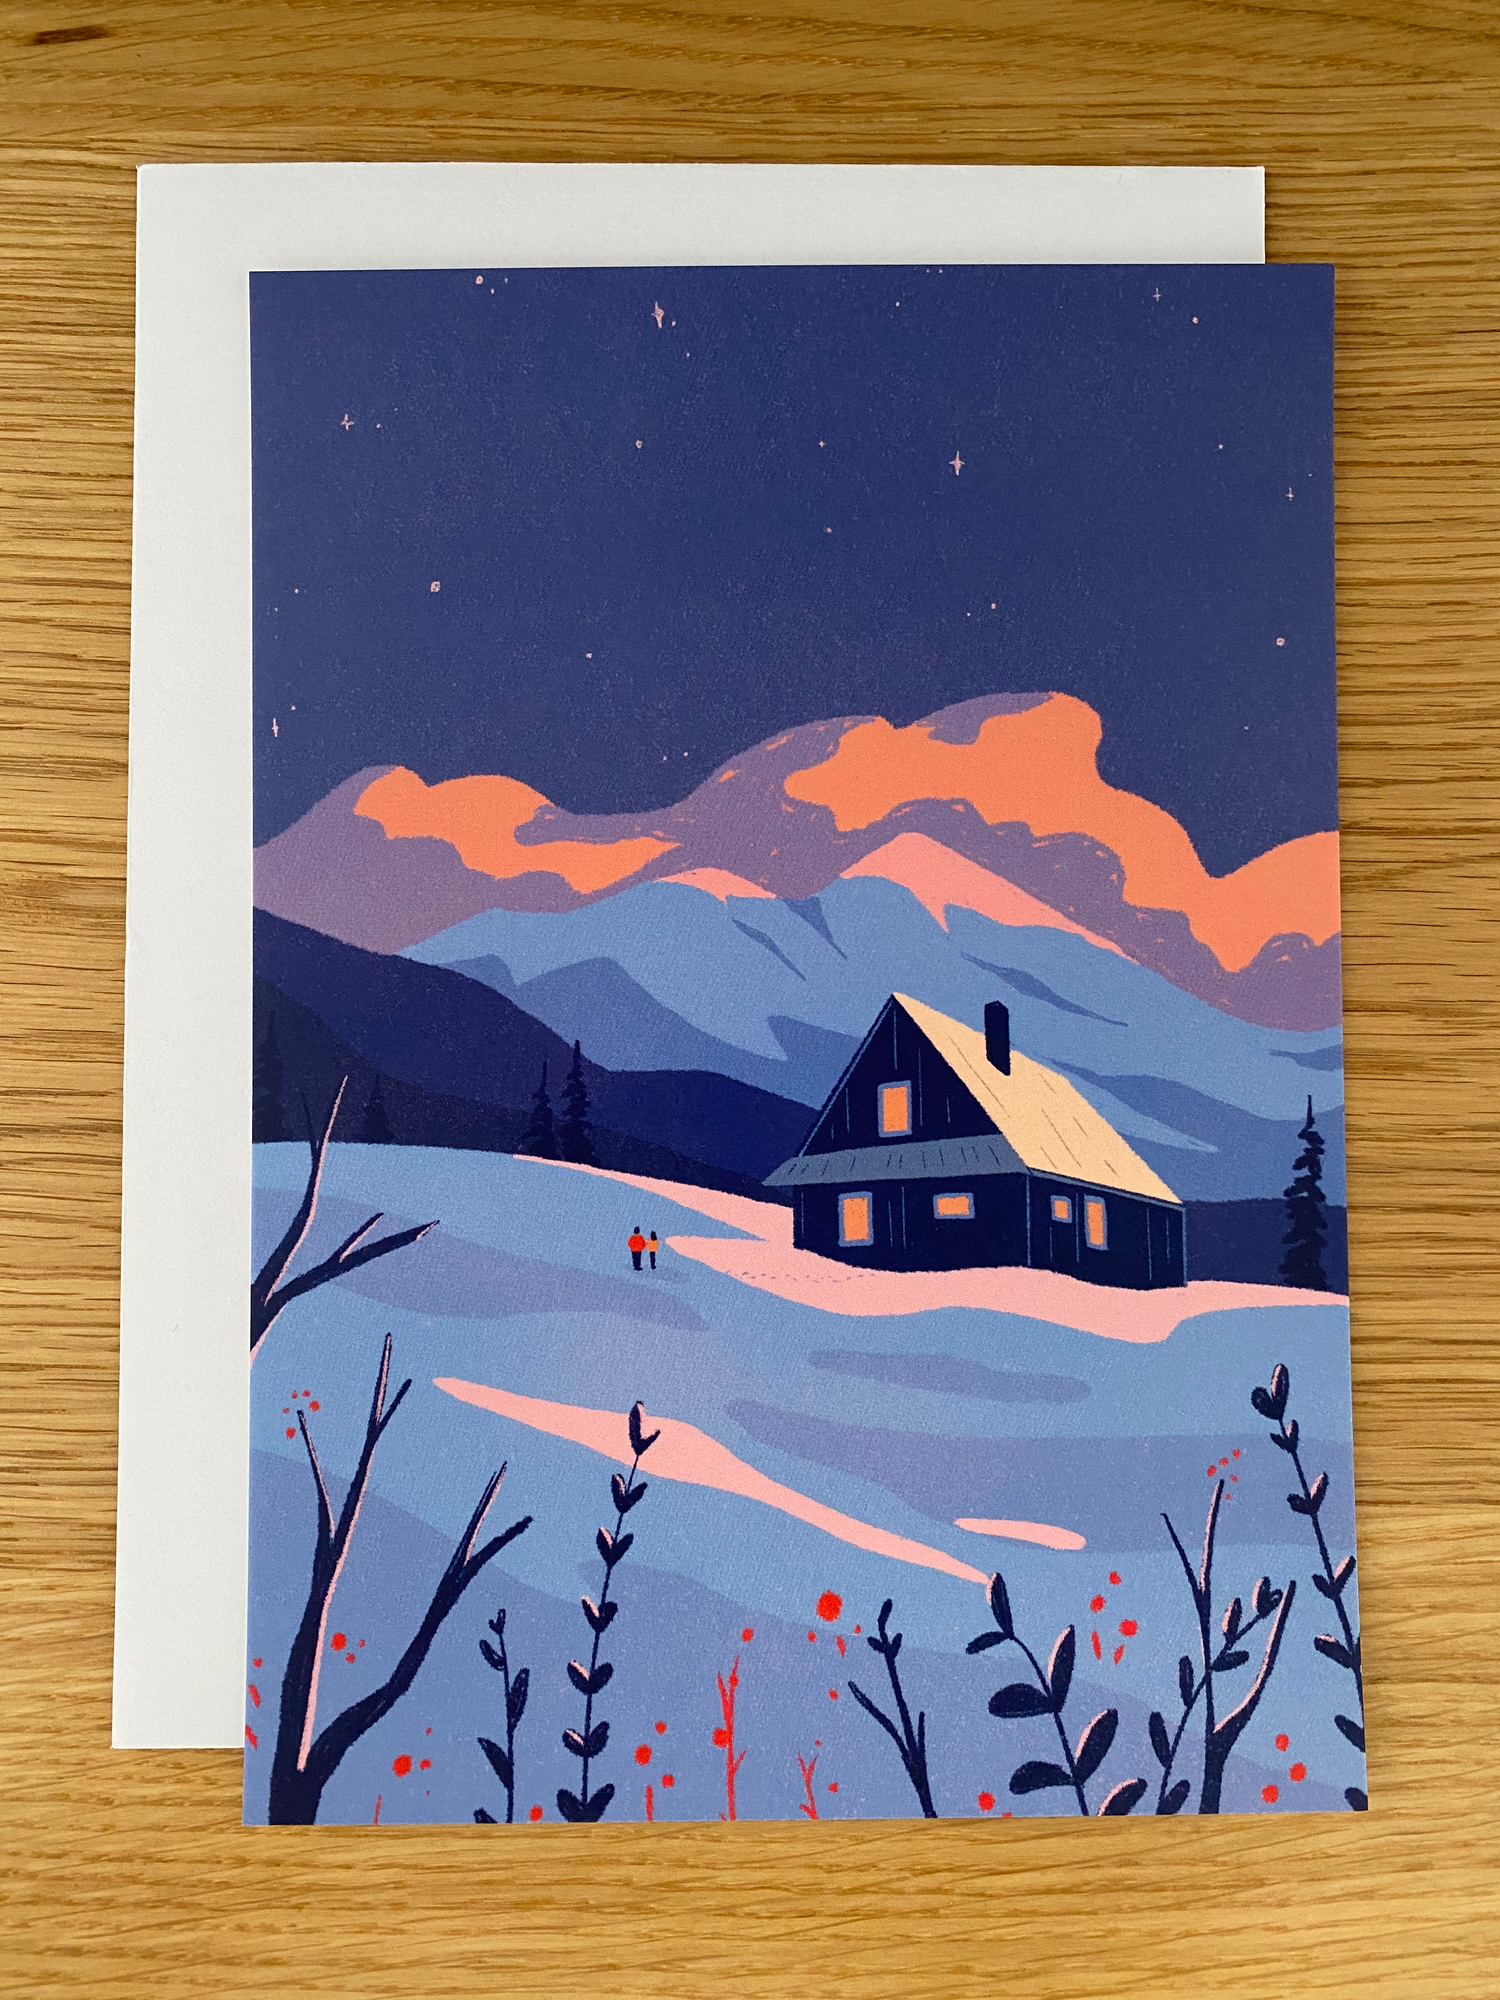 Postcard from Alpine Glow collection from Annika Layne, mountain cabin scene